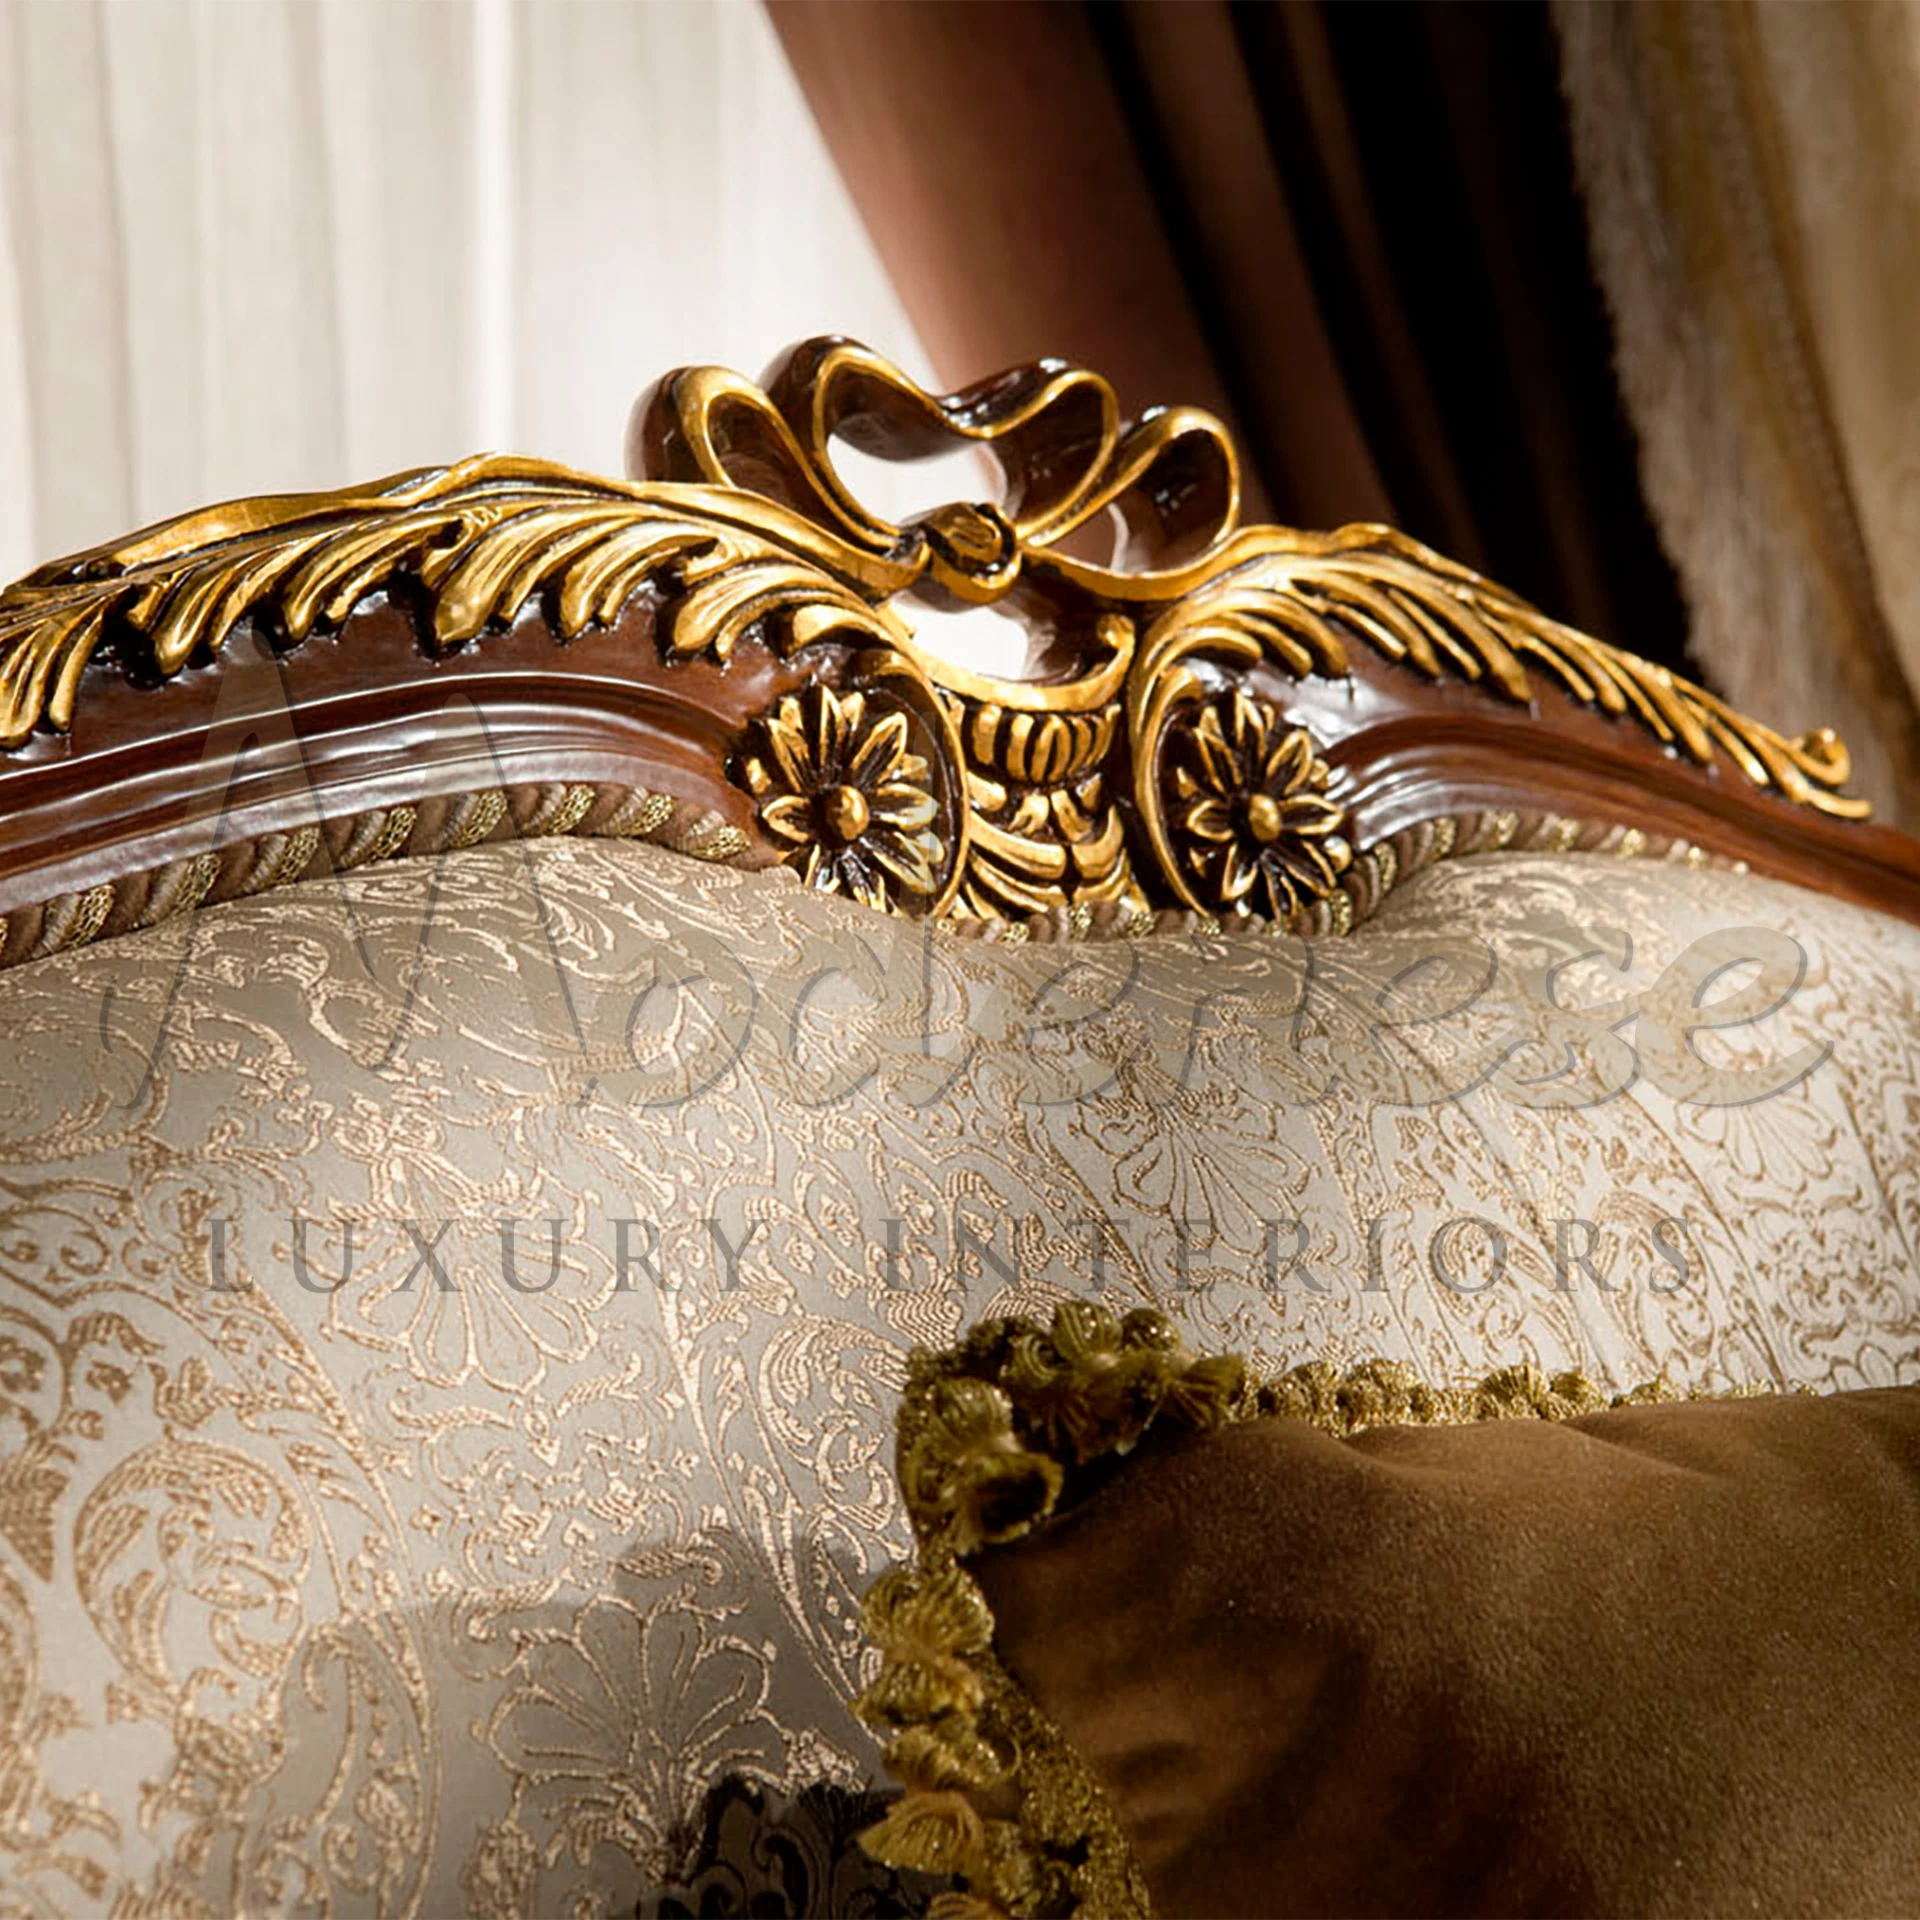 Handcrafted Imperial Sofa: Timeless Elegance in Every Detail